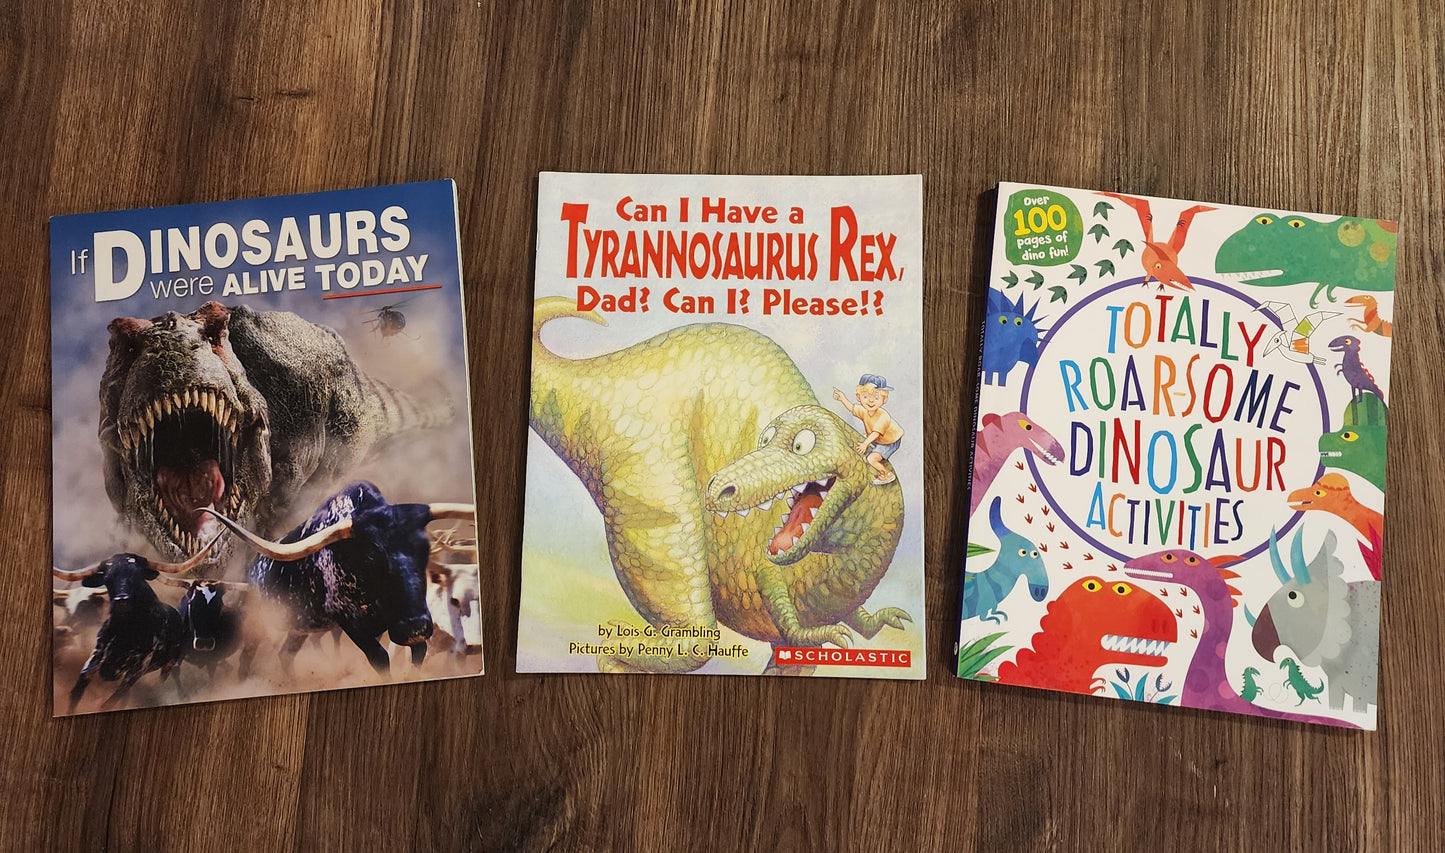 Dinosaur book bundle. Activity book has over 100 pages of activities, never used.